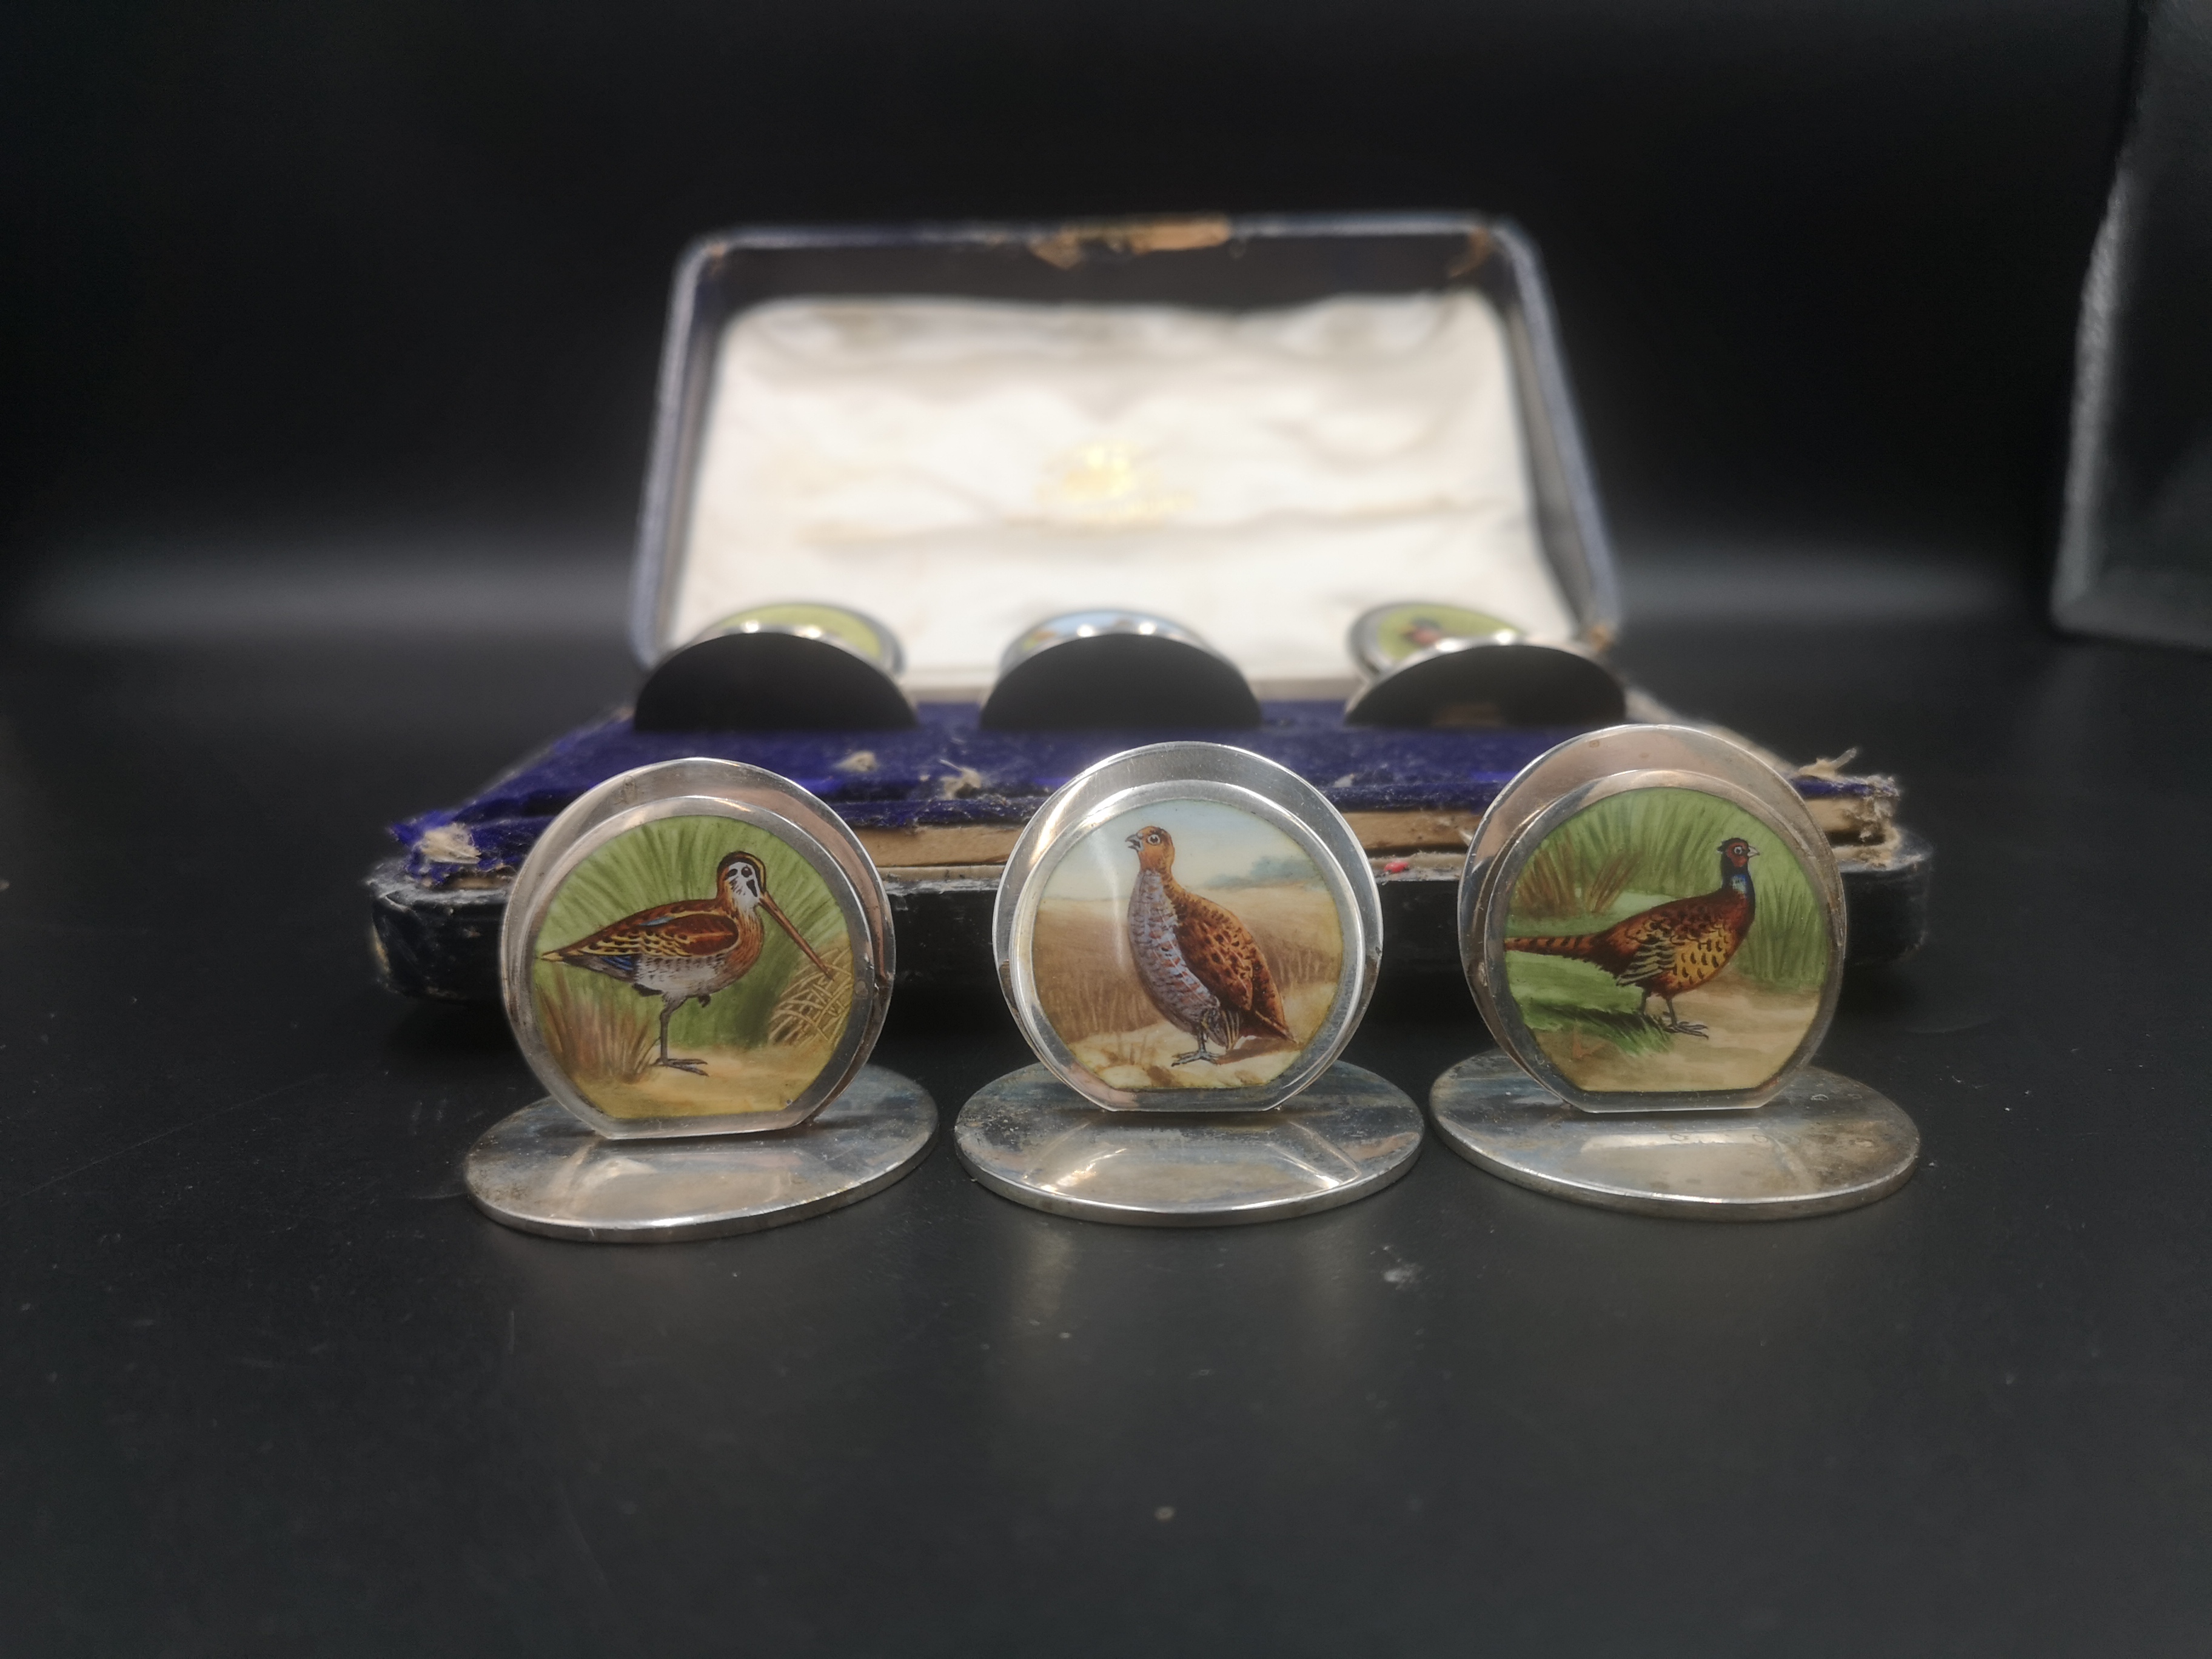 Boxed set of Edwardian silver menu card holders with hand painted birds by Sampson Mordan - Image 4 of 5